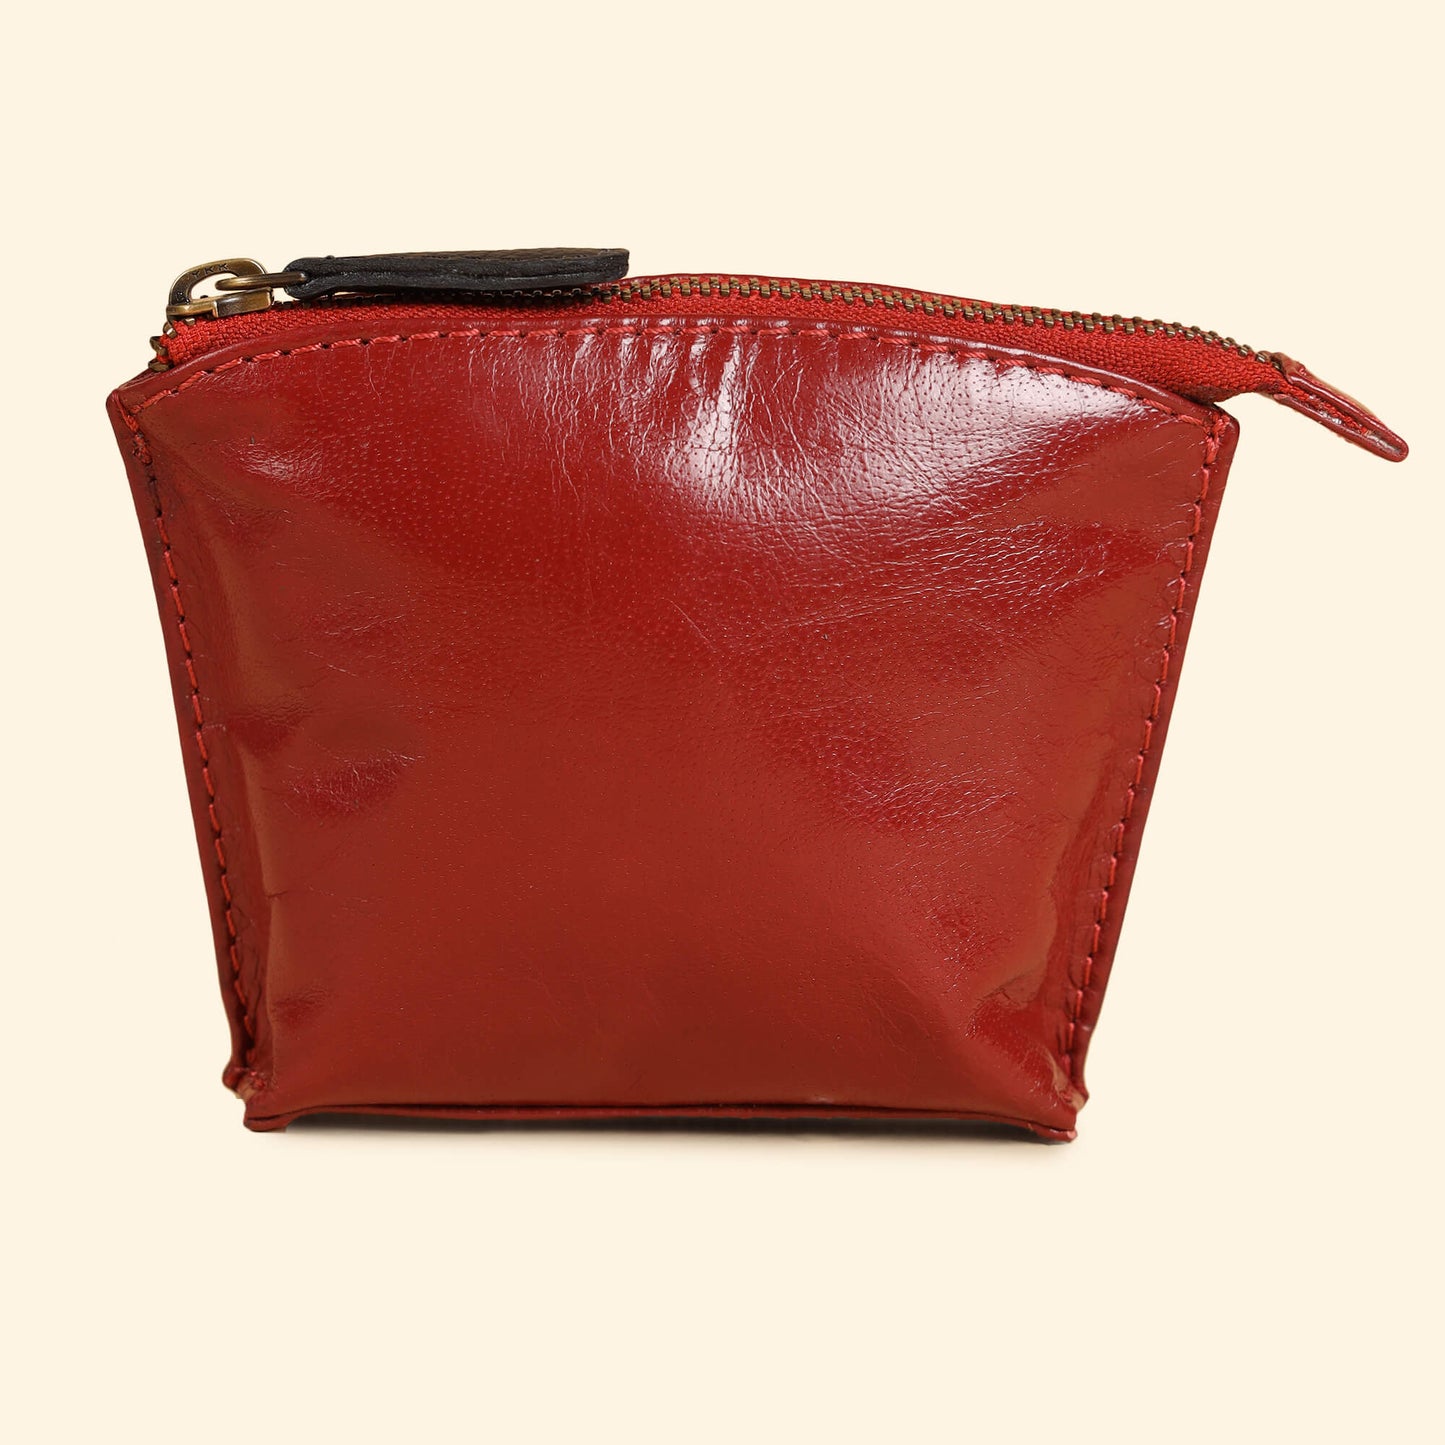 Auna Coin Purse- Genuine Waxy Leather Red